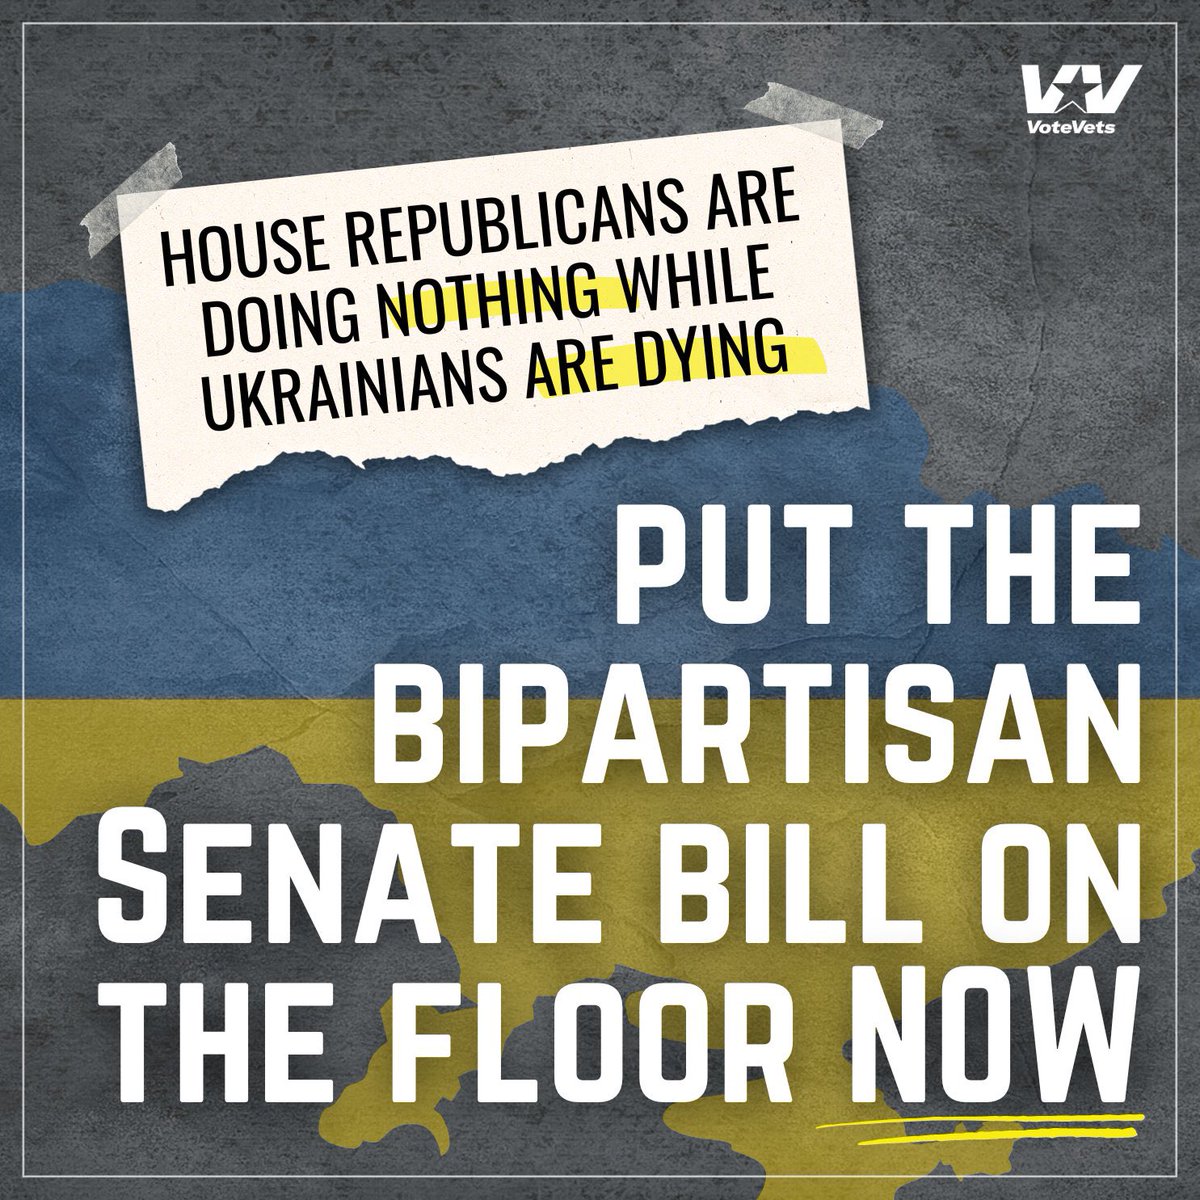 If Ukraine falls, it's not just their crisis - it risks drawing our Troops into conflict if Putin advances west. Delaying aid endangers more than Ukraine, it risks a global crisis. @SpeakerJohnson, we urge you to bring the Senate bill for a vote NOW. #VeteransForUkraine